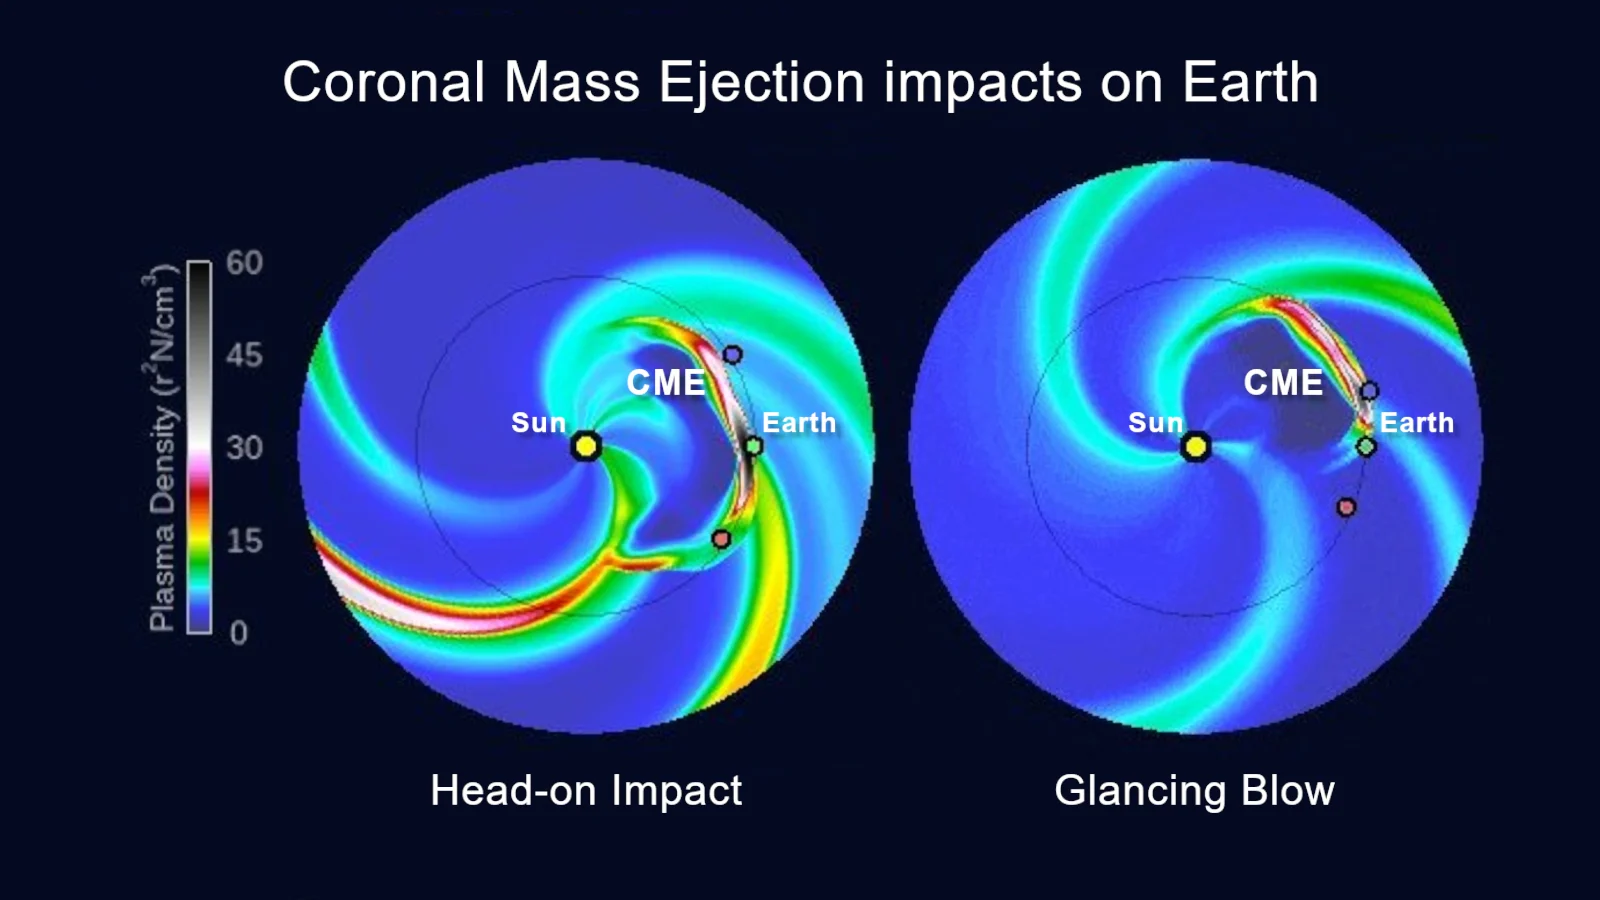 CME Impacts on Earth - NOAA SWPC